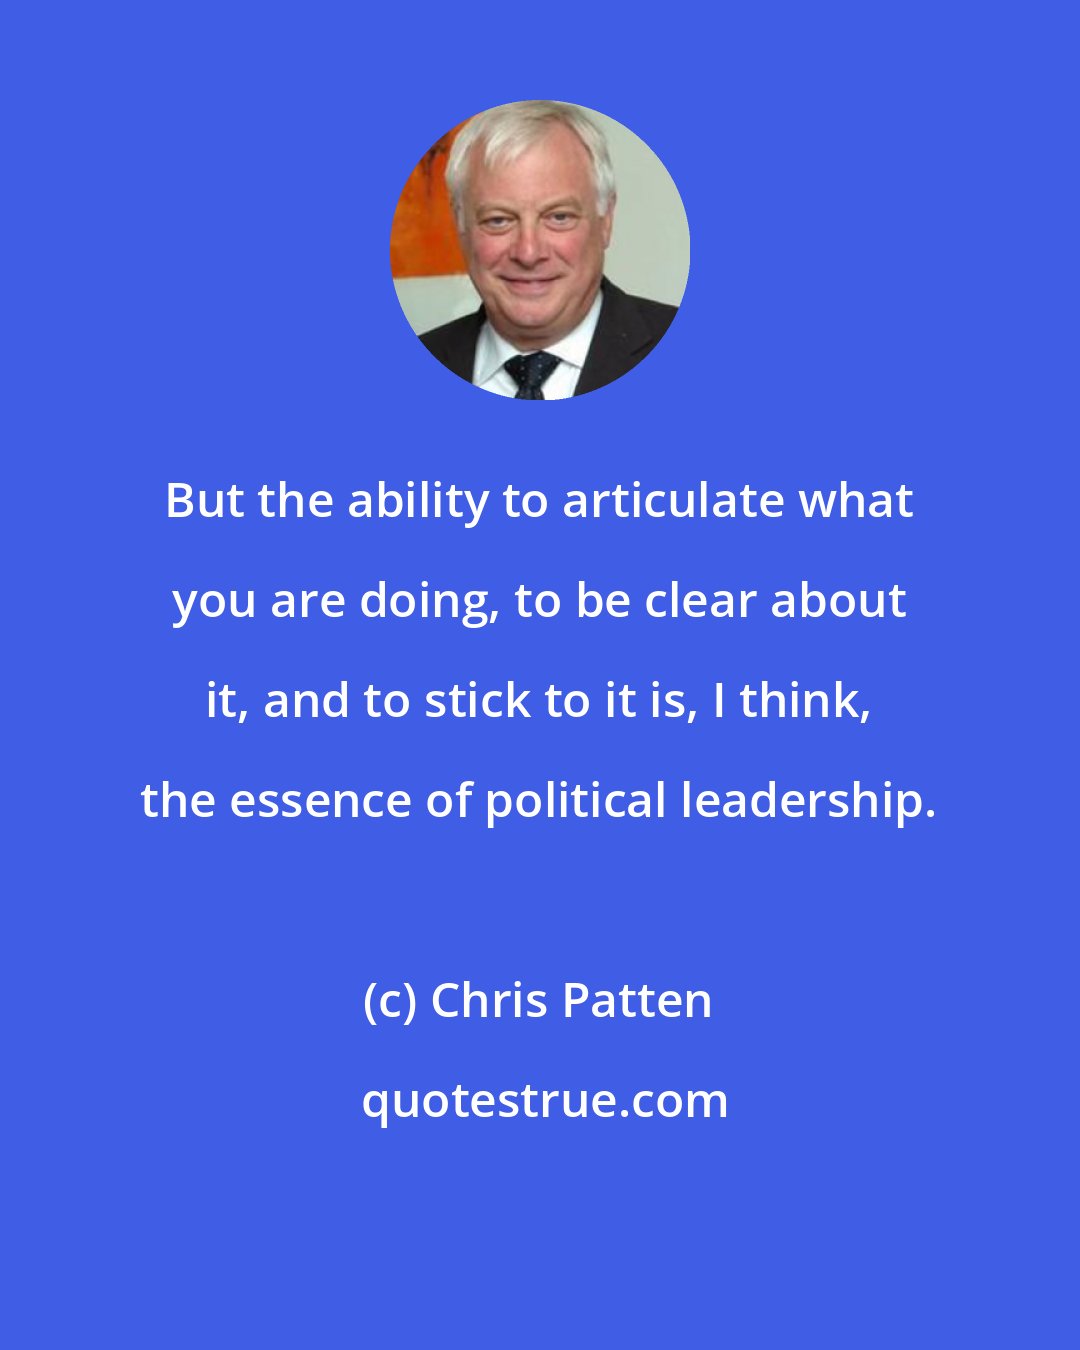 Chris Patten: But the ability to articulate what you are doing, to be clear about it, and to stick to it is, I think, the essence of political leadership.